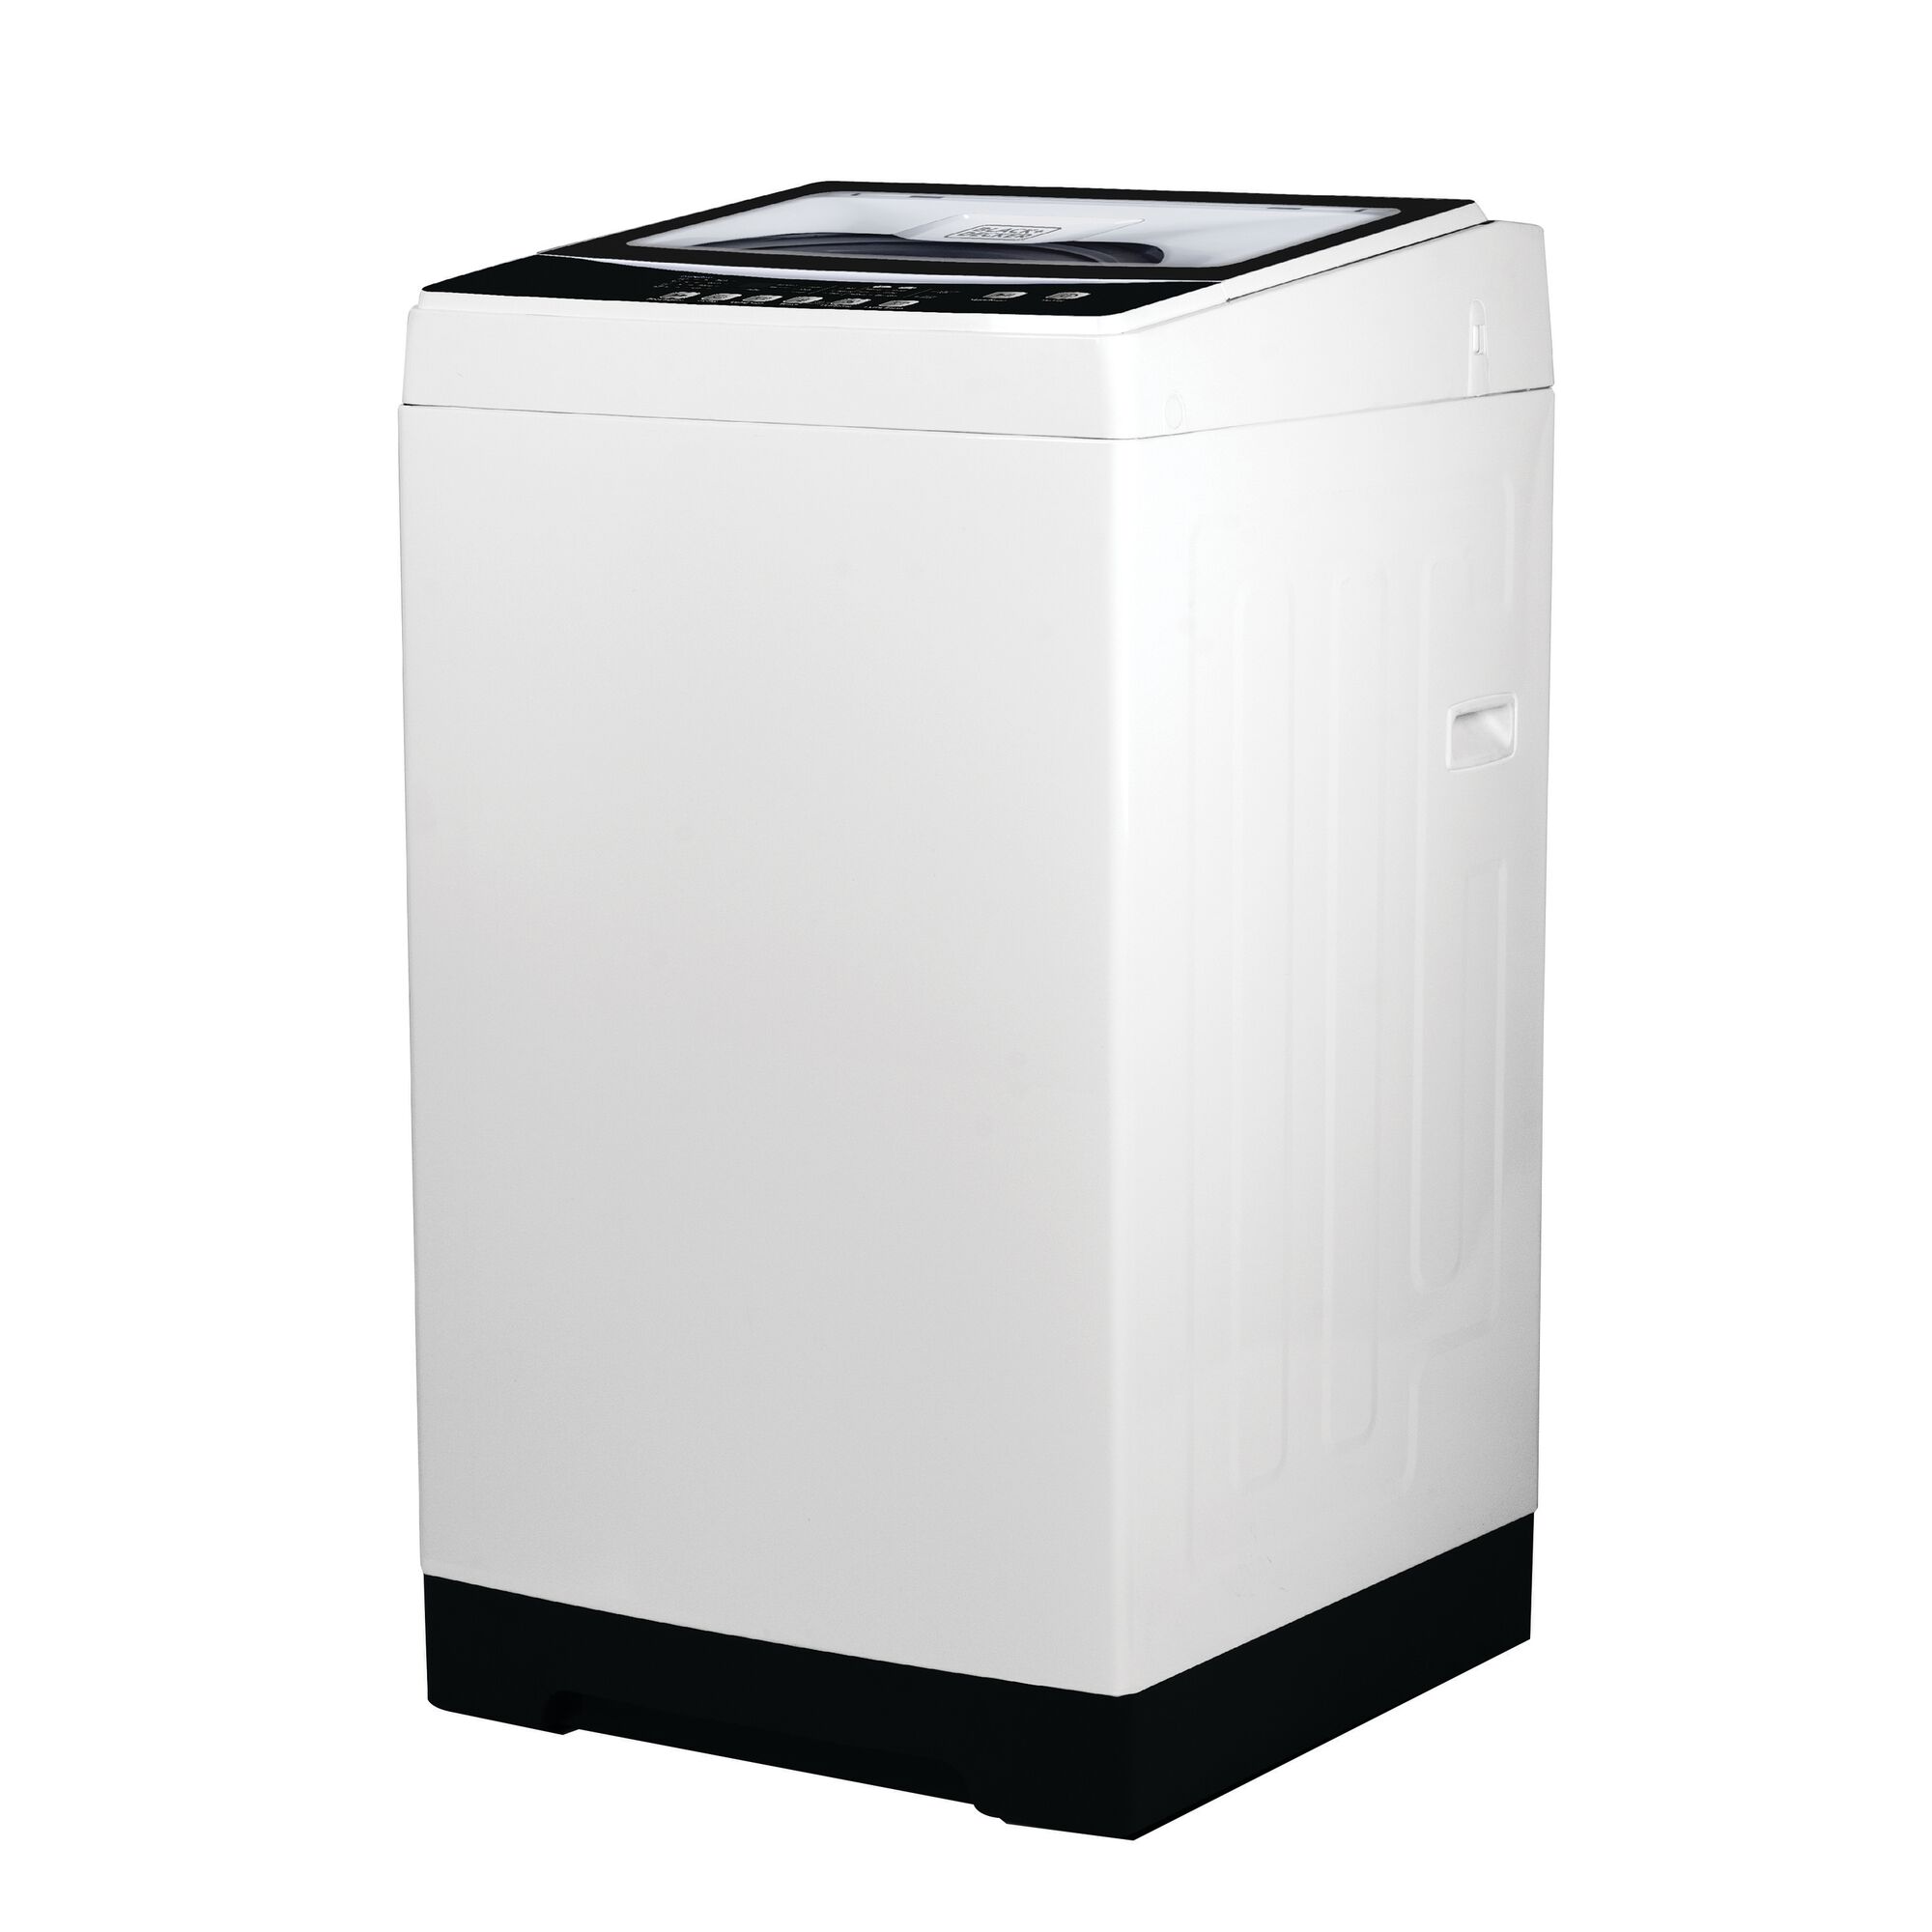 Profile of the BLACK+DECKER 1.6 cu ft portable washer